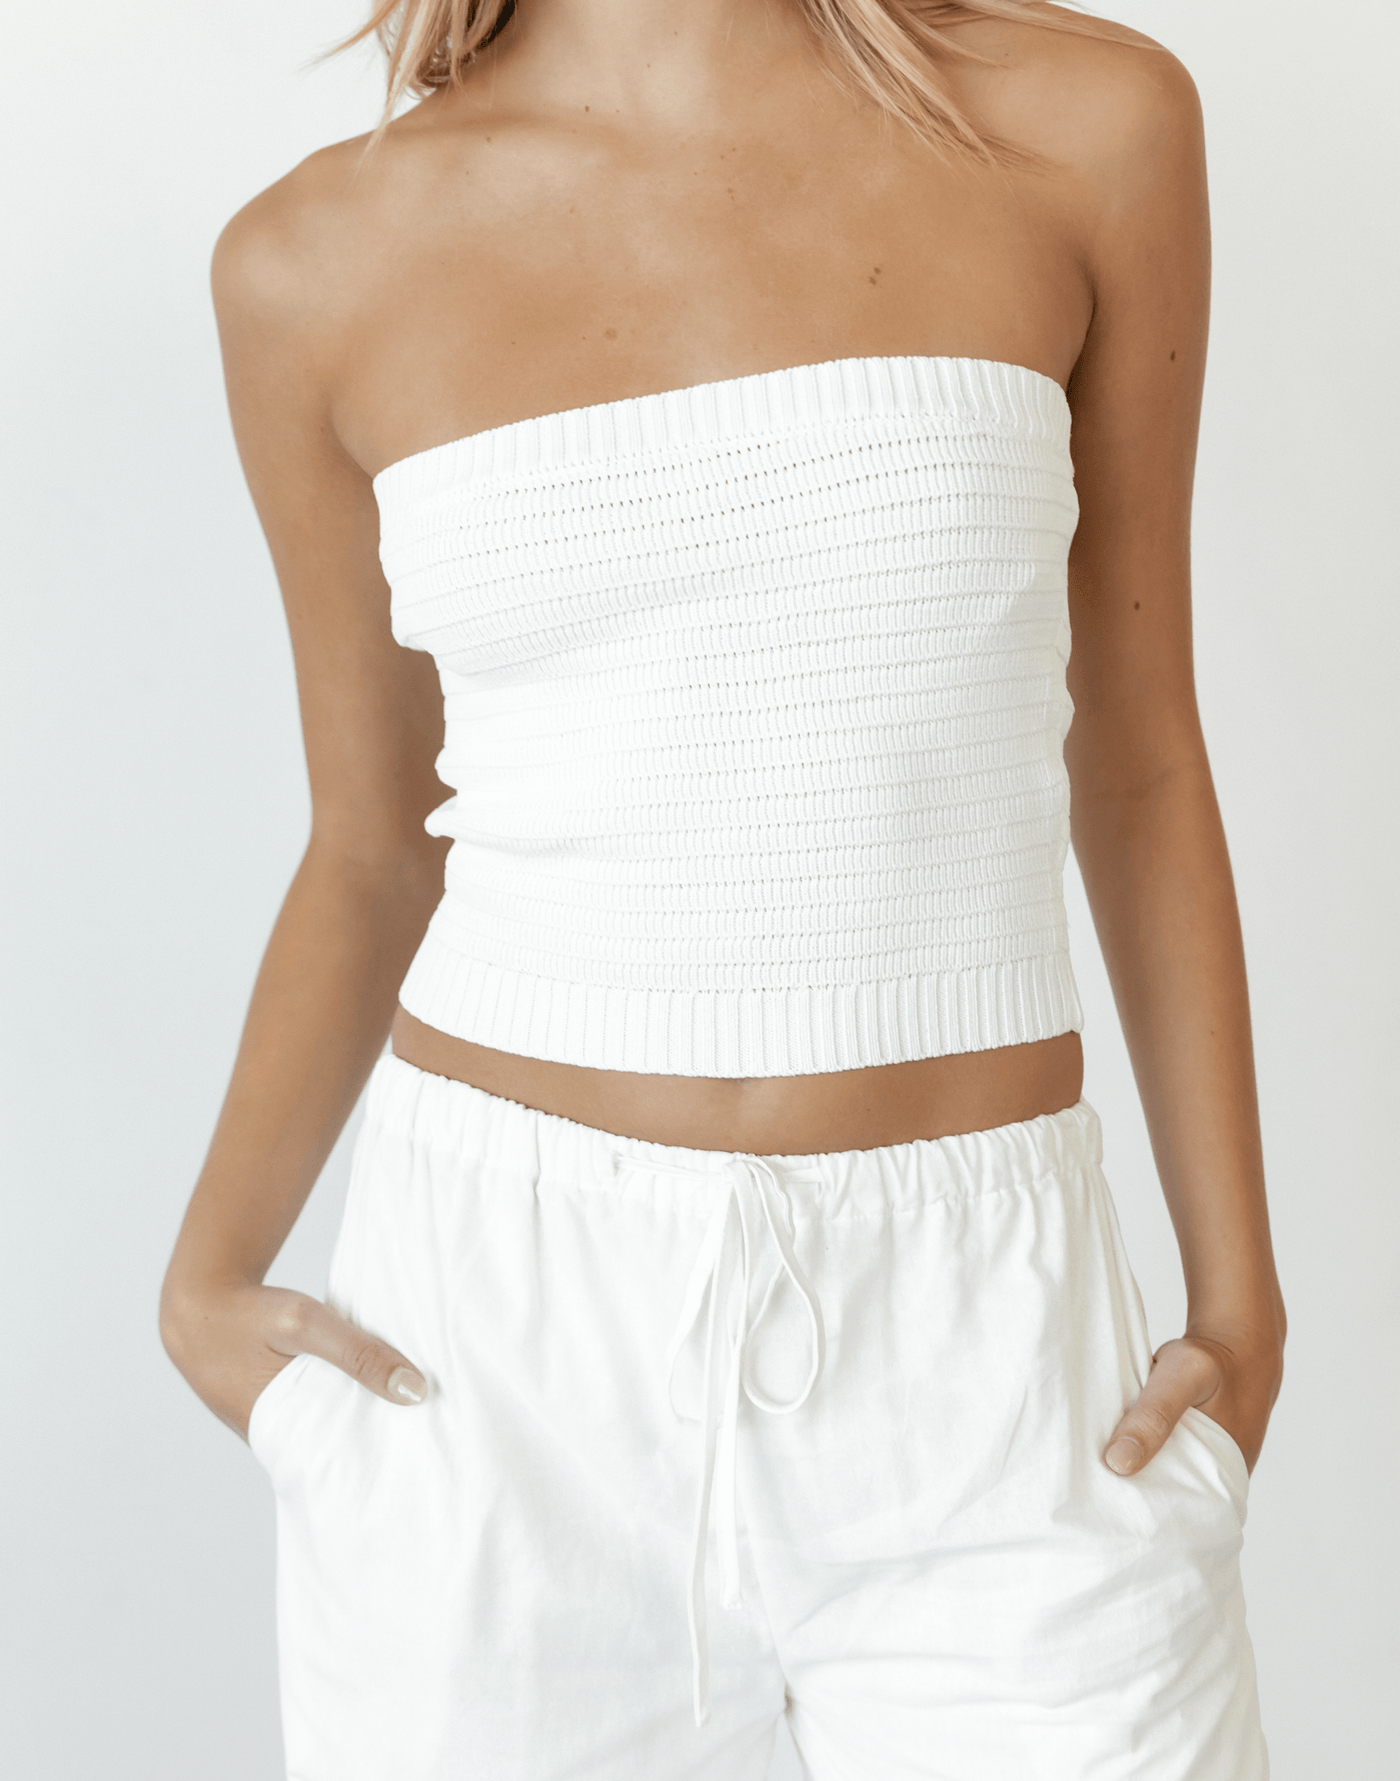 Lytton Strapless Crop Top (White) - Ribbed Knit Strapless Top - Women's Top - Charcoal Clothing